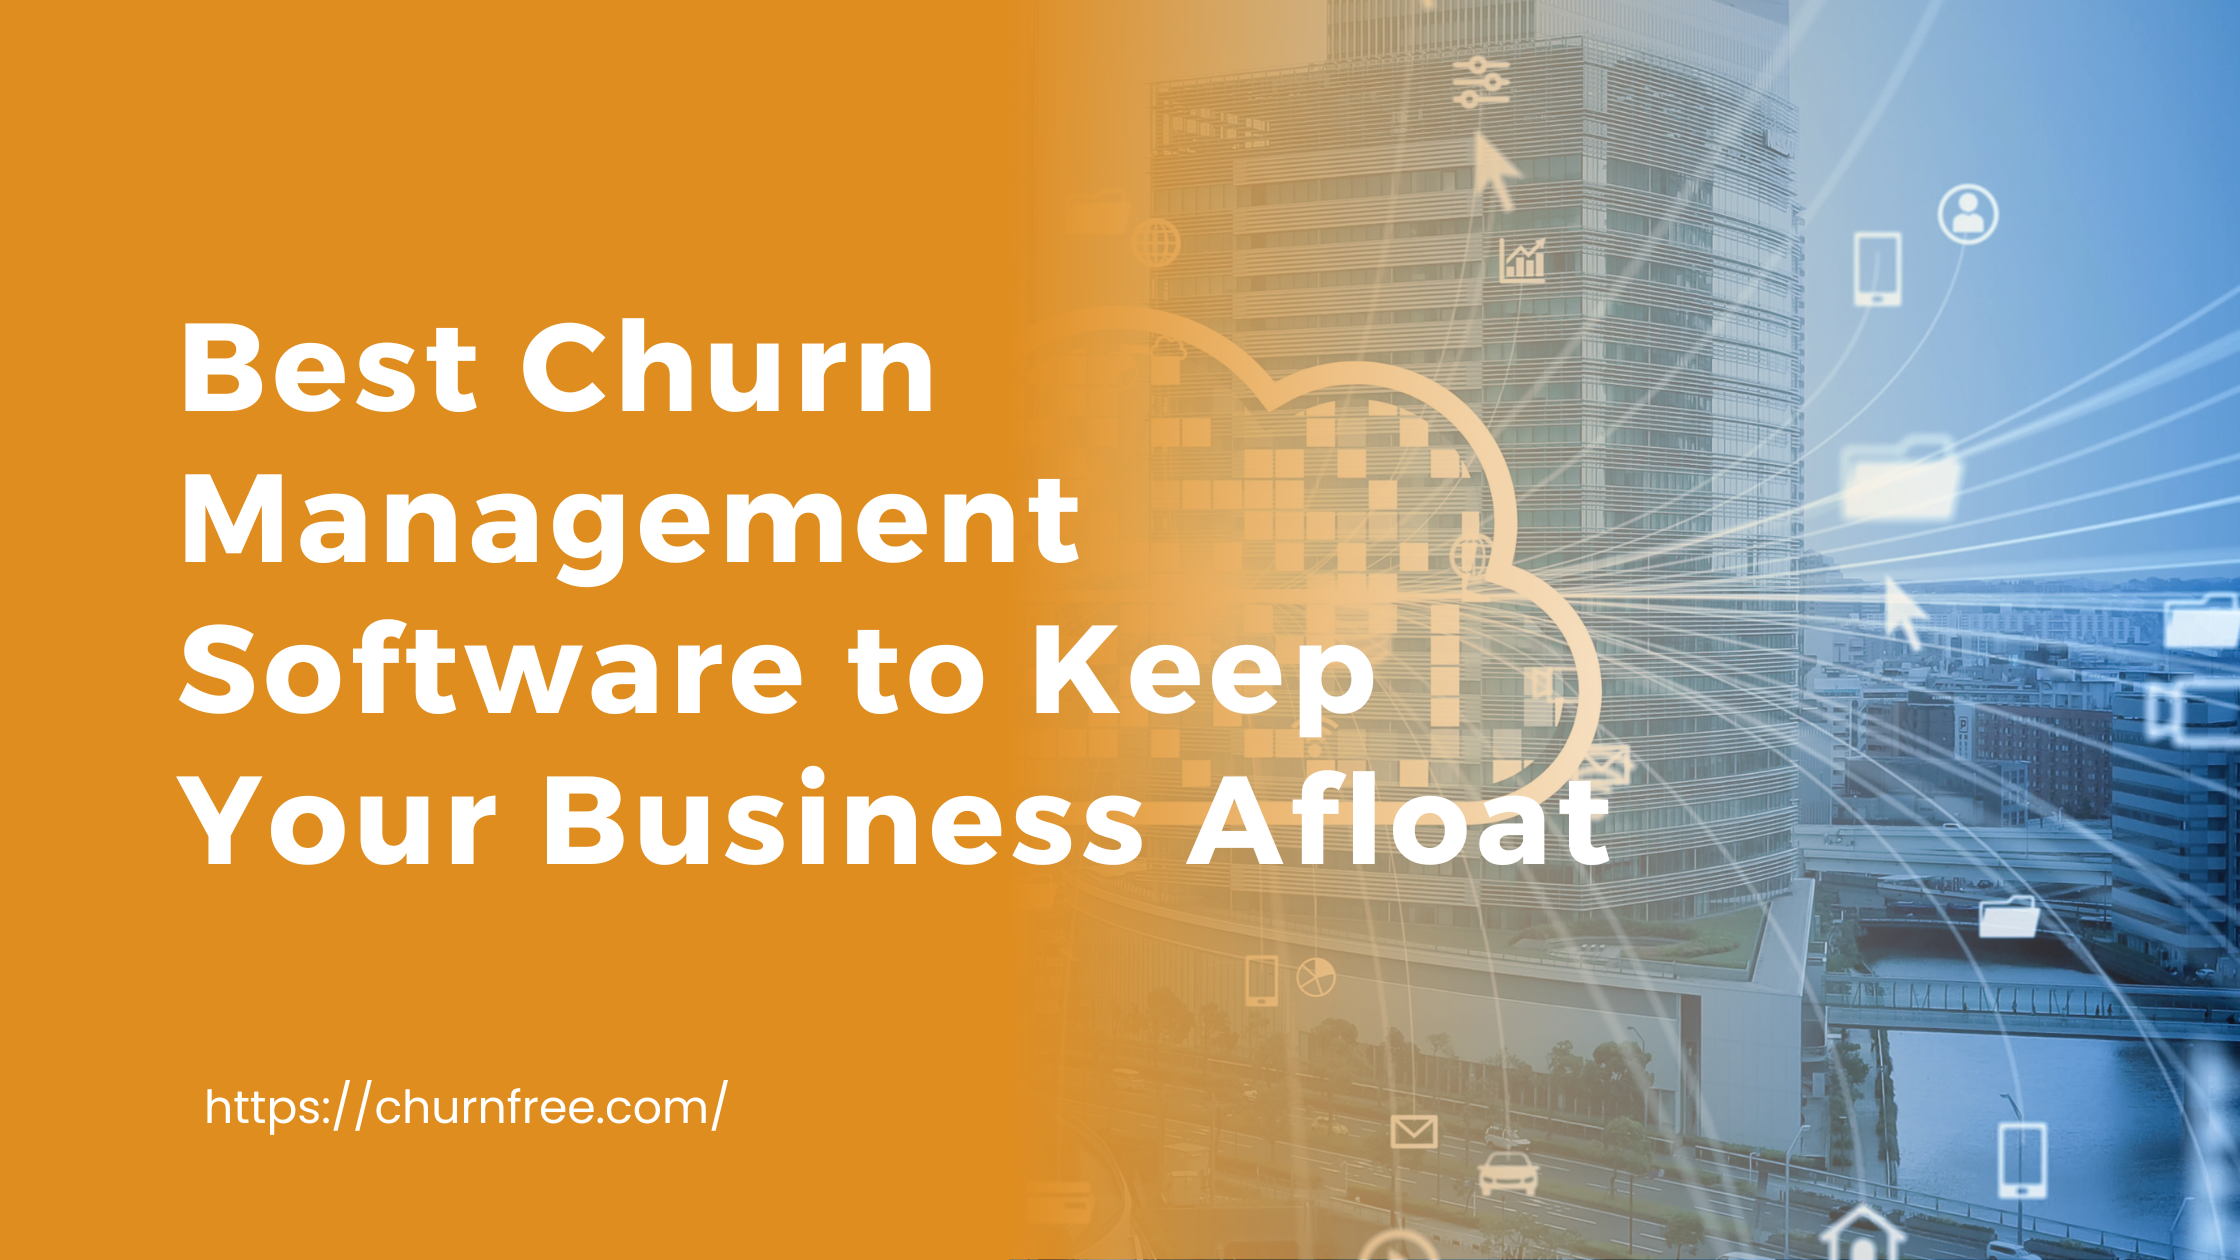 Best Churn Management Software to Keep Your Business Afloat